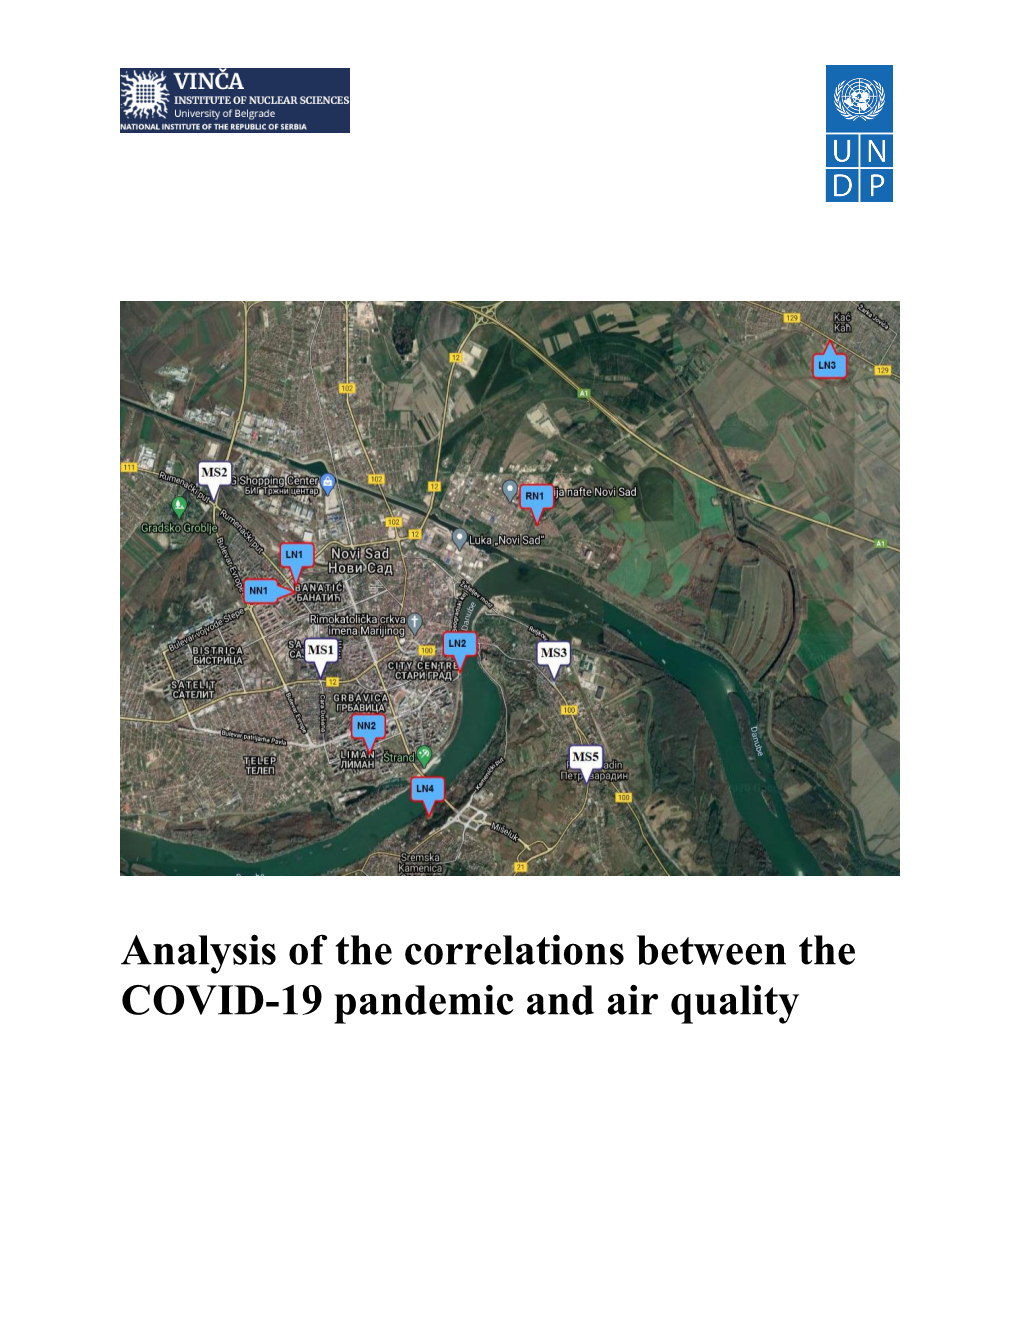 Analysis of the Correlations Between the COVID-19 Pandemic and Air Quality